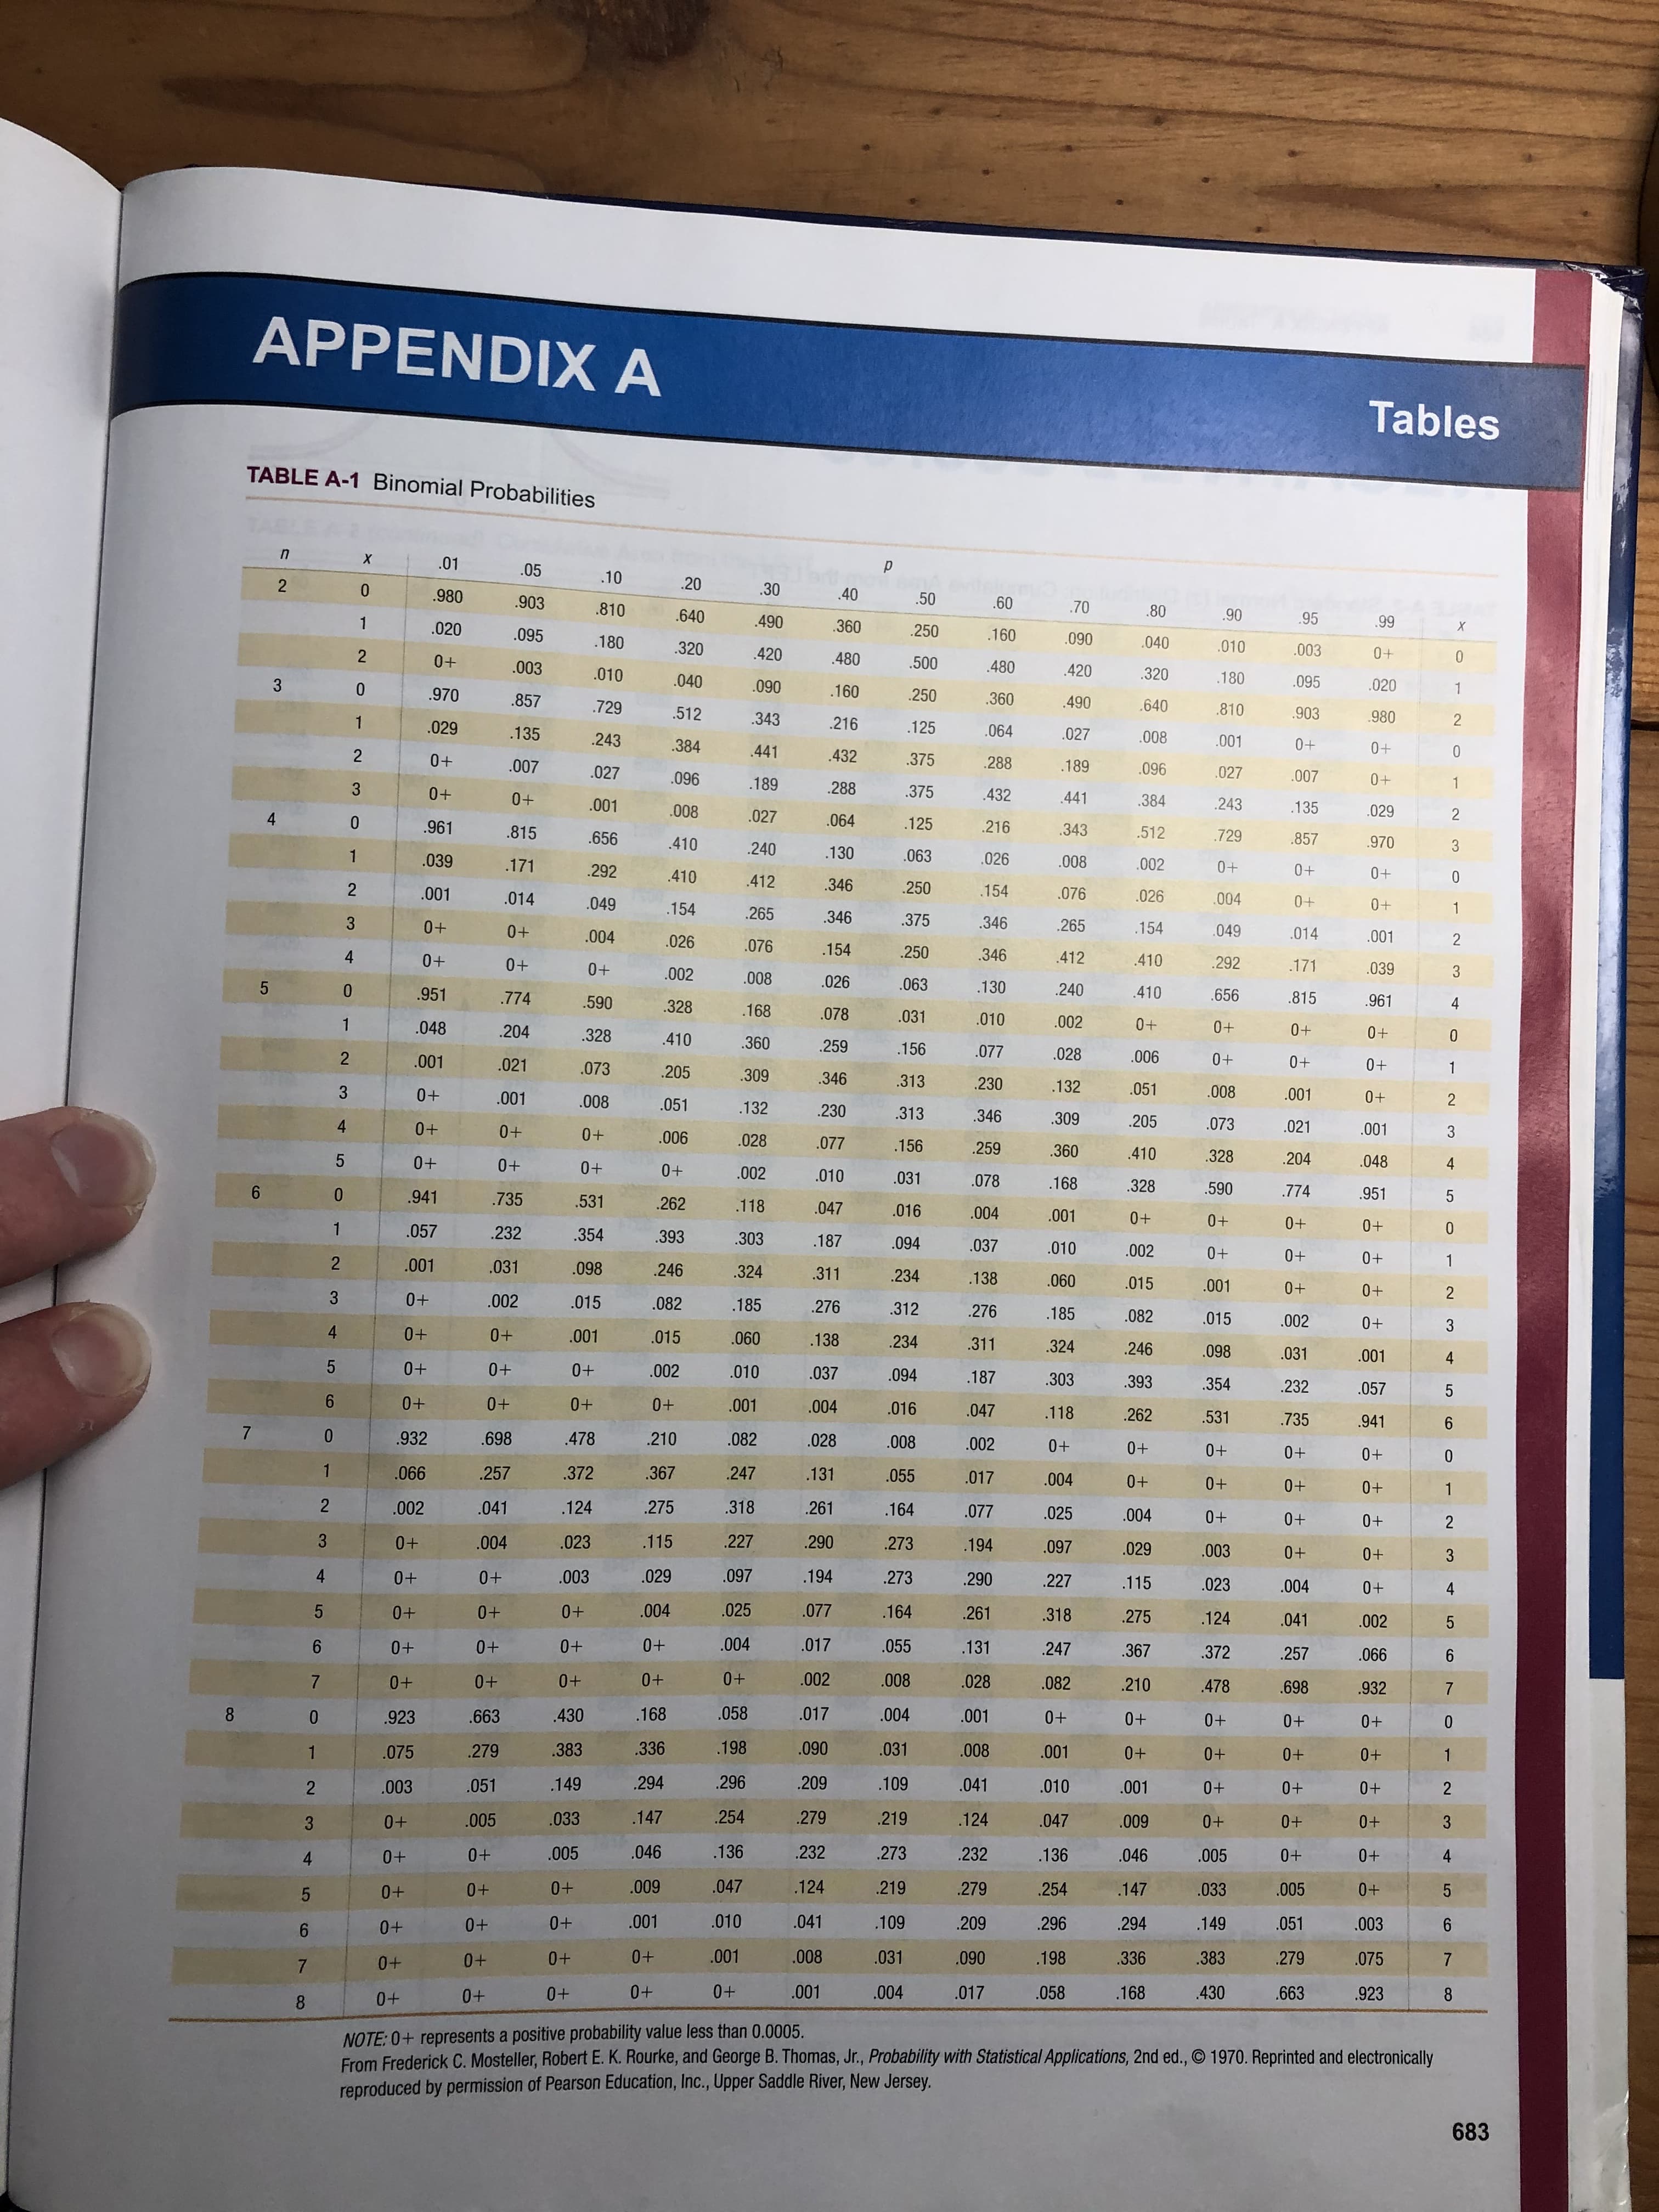 APPENDIX A
Tables
TABLE A-1 Binomial Probabilities
.01
.05
.10
.20
.980
.30
.40
.50
.903
.810
.60
.70
.80
.640
.490
.90
.95
.99
.020
.095
.360
.250
.160
.180
.320
.090
.040
.010
.003
.420
.480
.500
.003
.010
.480
.420
.320
.040
.090
.180
.095
.020
.970
.857
.160
.250
.360
.490
.729
.512
.640
.810
.903
.029
.343
.216
.125
980
2
.135
.243
.064
.027
.008
.001
.384
.441
0+
0+
.007
.432
.375
.288
.189
.027
.096
.096
.027
.007
3
0+
.189
.288
.375
.432
1
0+
.001
.441
.384
.243
.135
4
.008
.027
.064
.029
.961
.815
.125
.216
.343
.512
.656
.410
.729
.857
.970
3
.240
.130
.063
.026
.039
.171
.008
.002
0+
.292
.410
412
0+
.001
.346
.250
.154
.076
.026
.014
.049
.004
.154
.265
.346
.375
1
3
0+
0+
.346
.265
.154
.049
.014
.004
.026
.076
.001
0+
.154
.250
.346
.412
.410
0+
.002
.292
.171
.039
3
.008
.026
.063
.130
.951
.774
.590
.240
.410
.656
.815
.961
.328
.168
.078
4
1
.031
.010
.002
0+
.048
.204
.328
0+
0+
.410
.360
.259
.156
.001
.077
.028
.006
0+
0+
.021
.073
.205
0+
1
.309
.346
.313
.230
3
0+
.132
.051
.008
.001
.001
.008
.051
.132
.230
.313
.346
4
0+
.309
.205
.073
.021
.001
0+
.006
.028
3
.077
.156
.259
.360
5
0+
0+
.410
.328
.204
.048
4
0+
0+
.002
.010
.031
.078
.168
.328
.590
.774
.941
.735
.531
.262
.118
.951
5
.047
.016
.004
.001
.057
.232
.354
.393
0+
.303
.187
.094
.037
.010
.002
0+
.001
.031
.098
.246
.324
.311
.234
.138
.060
.015
.001
+0
3
0+
.002
.015
0+
2
.082
.185
.276
.312
.276
.185
.082
.015
.002
0+
3
4
0+
.001
.015
.060
.138
.234
.311
.324
.246
.098
.031
.001
4
0+
0+
.002
.010
.037
.094
.187
.303
.393
.354
.232
.057
5
0+
0+
0+
.001
.004
.016
.047
.118
.262
.531
.735
.941
7
.932
.698
.478
.210
.082
.028
.008
.002
0+
0+
0+
0+
0+
.066
.257
.372
.367
.247
.131
.055
.017
.004
0+
0+
2
.002
.041
.124
.275
.318
.261
.164
.077
.025
.004
0+
0+
2
3
0+
.004
.023
.115
.227
.290
.273
.194
.097
.029
.003
0+
3
4
0+
.003
.029
.097
.194
.273
.290
.227
.115
.023
.004
4
0+
0+
.004
.025
.077
.164
.261
.318
.275
.124
.041
.002
0+
0+
0+
.004
.017
.055
.131
.247
.367
.372
.257
.066
0+
0+
0+
0+
.002
.008
.028
.082
.210
.478
.698
.932
.923
.663
.430
.168
.058
.017
.004
.001
0+
0+
0+
0+
0+
1
.075
.279
.383
.336
.198
.090
.031
.008
.001
0+
0+
0+
+0
1
2
.003
.051
.149
.294
.296
.209
.109
.041
.010
.001
0+
0+
3
.005
.033
.147
.254
.279
.219
.124
.047
.009
0+
0+
3
4
0+
.005
.046
.136
.232
.273
.232
.136
.046
.005
4
0+
.009
.047
.124
.219
.279
.254
.147
.033
.005
0+
.001
.010
.041
.109
.209
.296
.294
.149
.051
.003
0+
0+
.001
.008
.031
.090
.198
.336
.383
.279
.075
7
0+
.001
.004
.017
.058
.168
.430
.663
.923
8
NOTE: 0+ represents a positive probability value less than 0.0005.
From Frederick C. Mosteller, Robert E. K. Rourke, and George B. Thomas, Jr., Probability with Statistical Applications, 2nd ed., © 1970. Reprinted and electronically
reproduced by permission of Pearson Education, Inc., Upper Saddle River, New Jersey.
683
2.
3.
